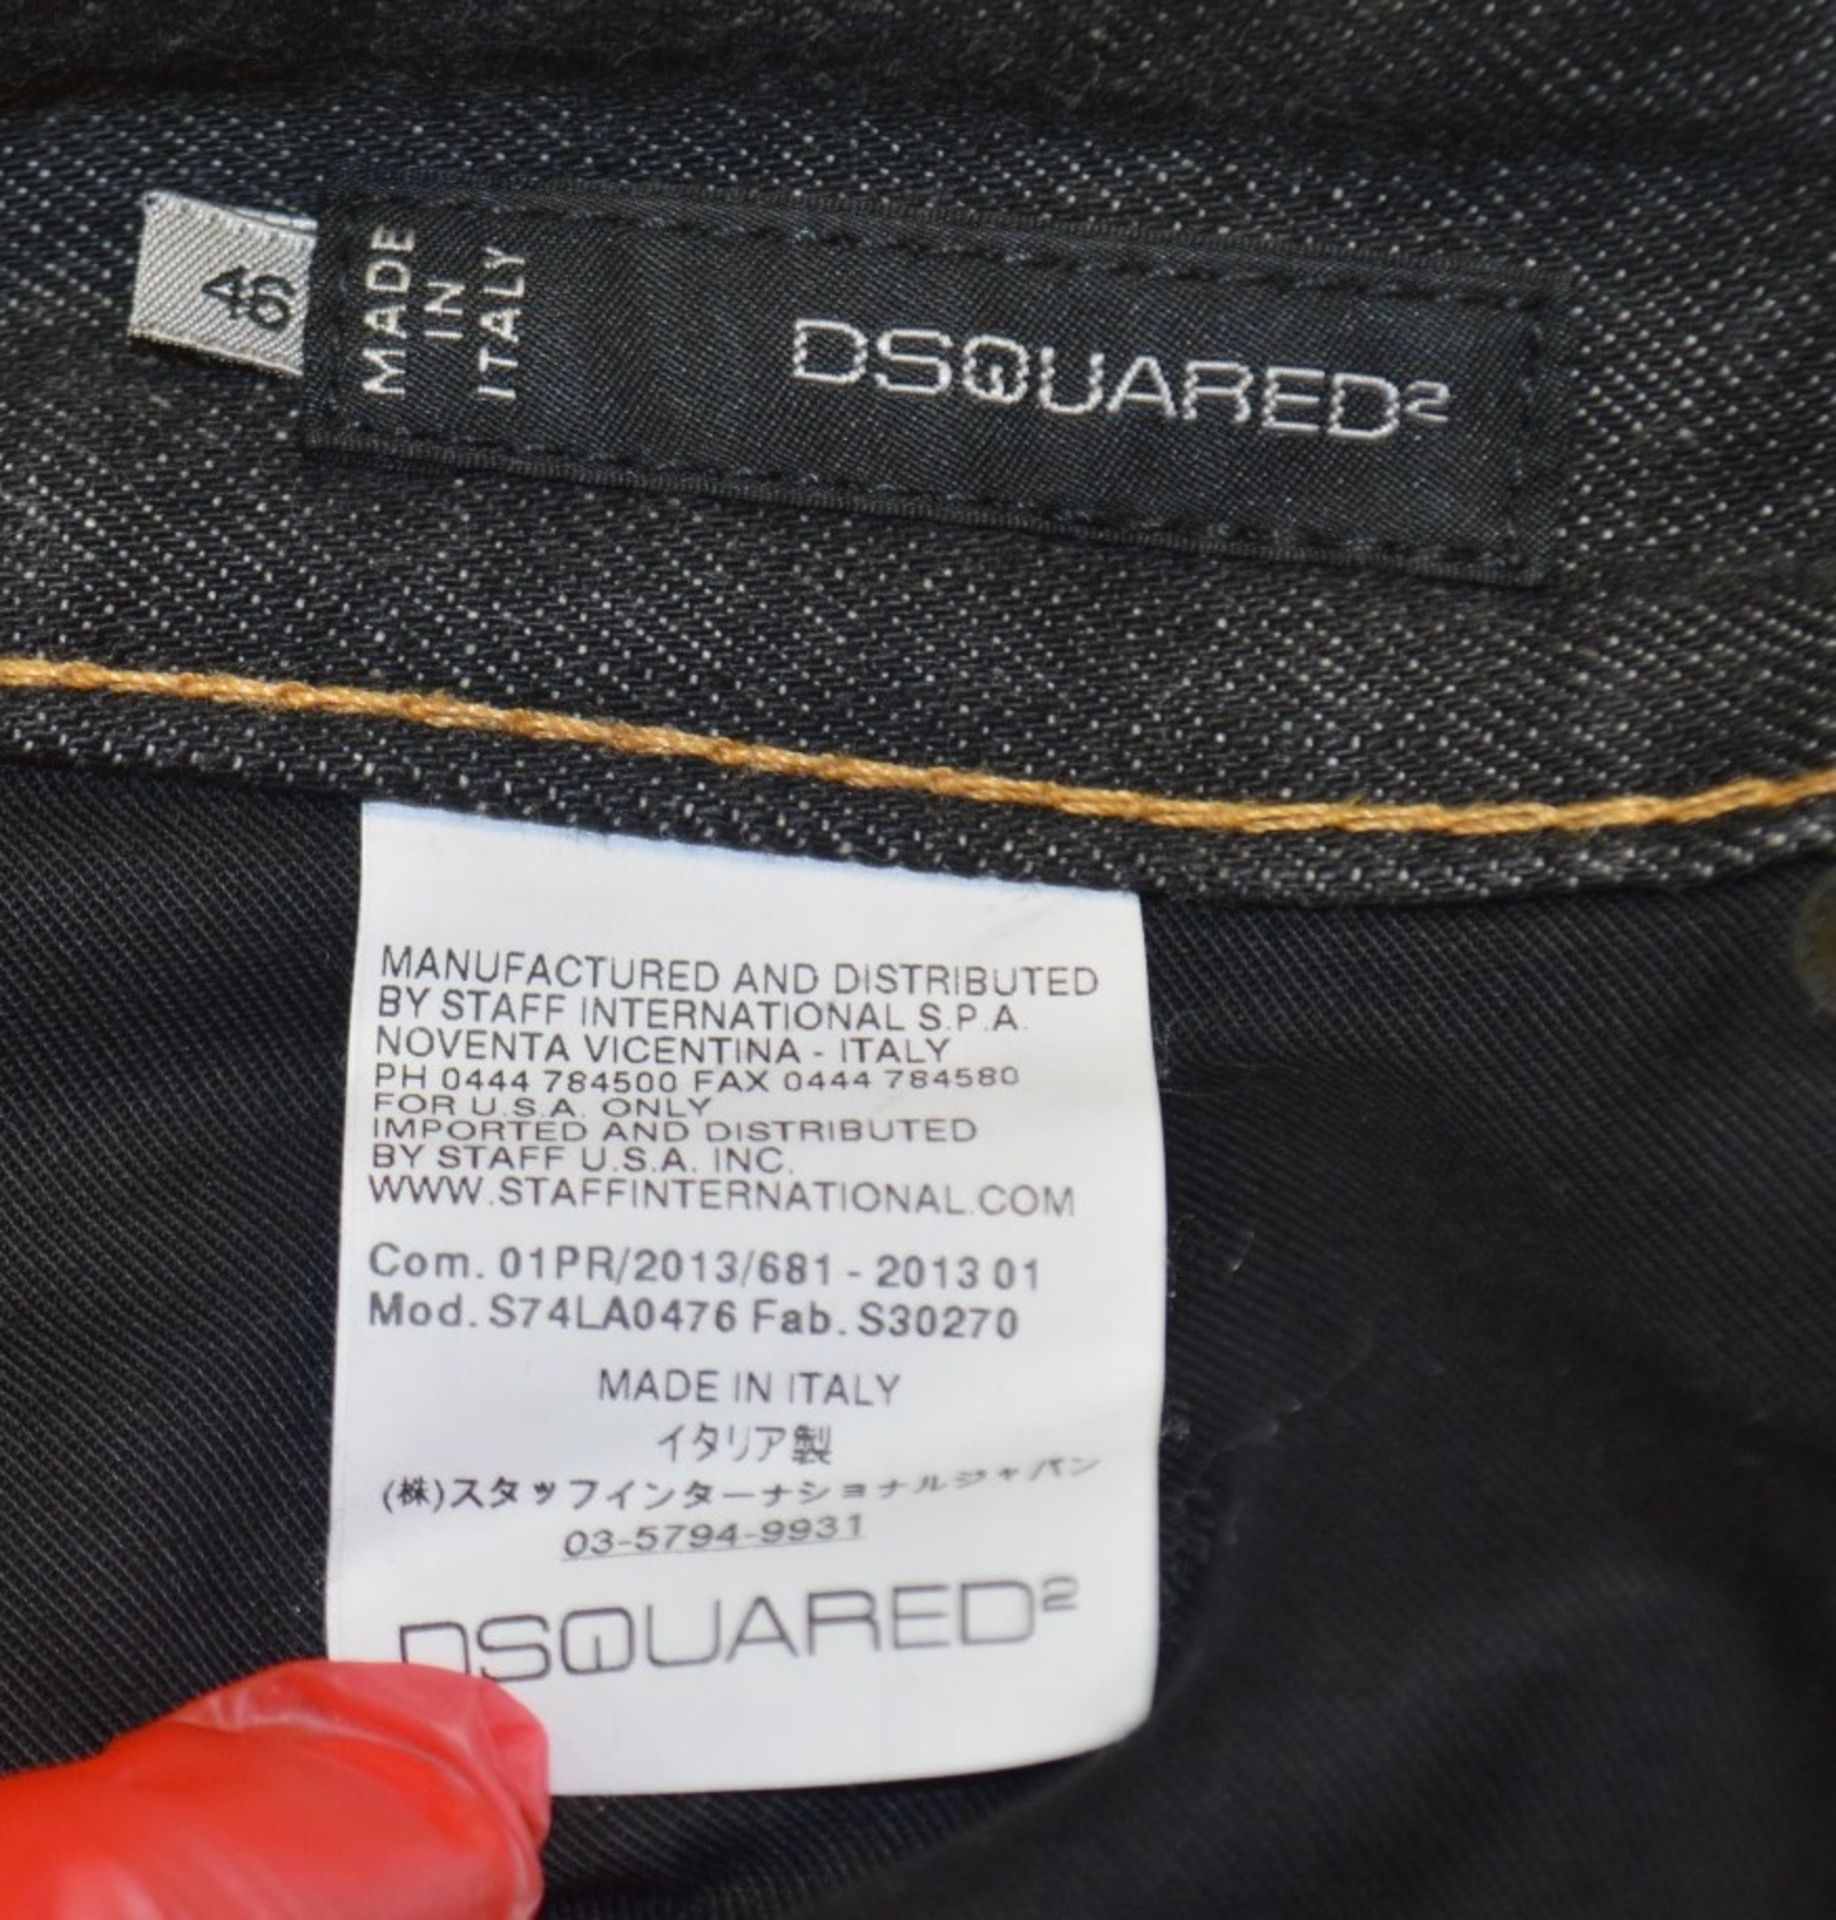 1 x Pair Of Men's Genuine Dsquared2 Distressed-style Designer Jeans In Black - Size: UK 30 - Image 2 of 7